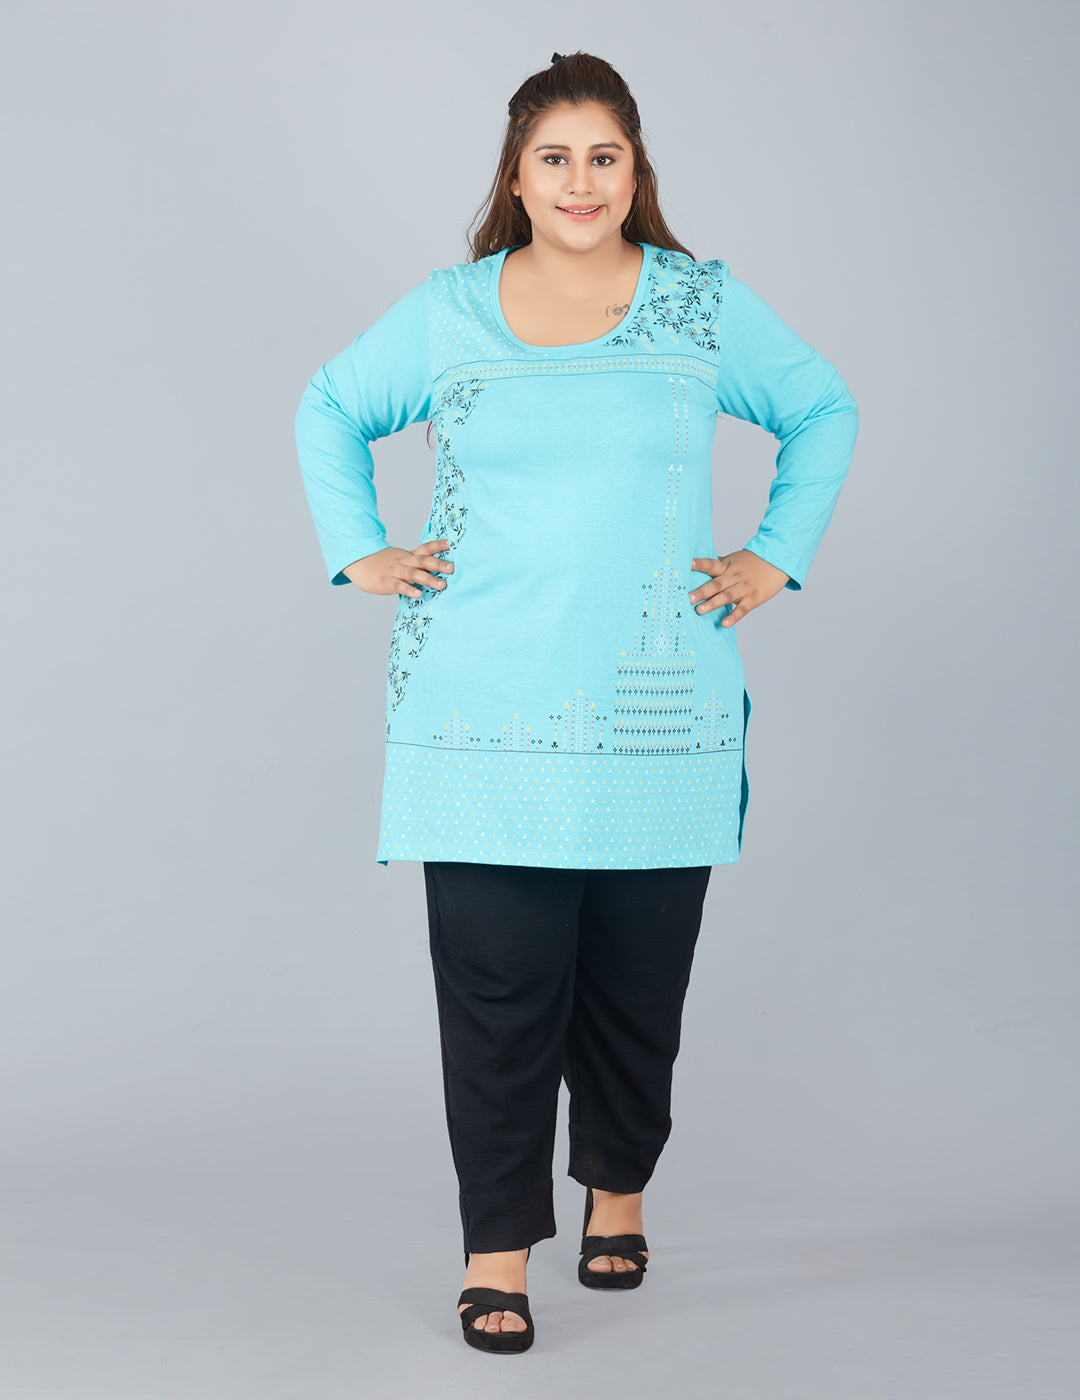 Plus Size Long T-shirts For Women - Half Sleeve - Turquoise